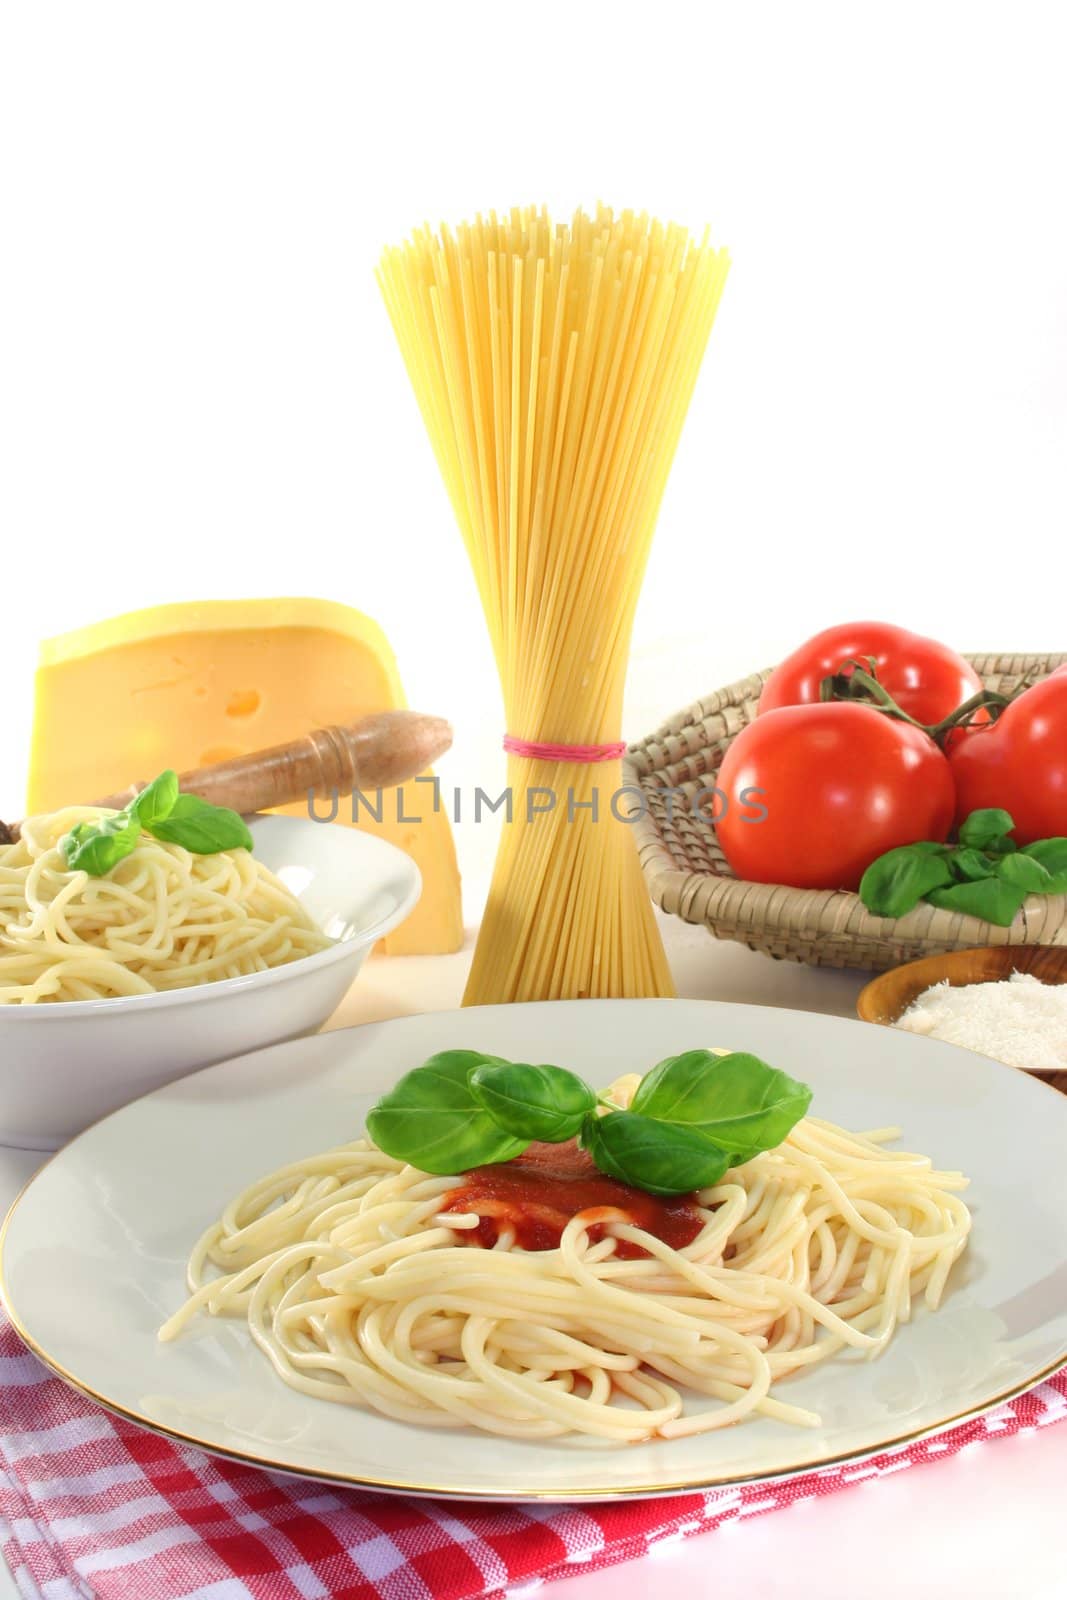 Spaghetti with tomato sauce by discovery